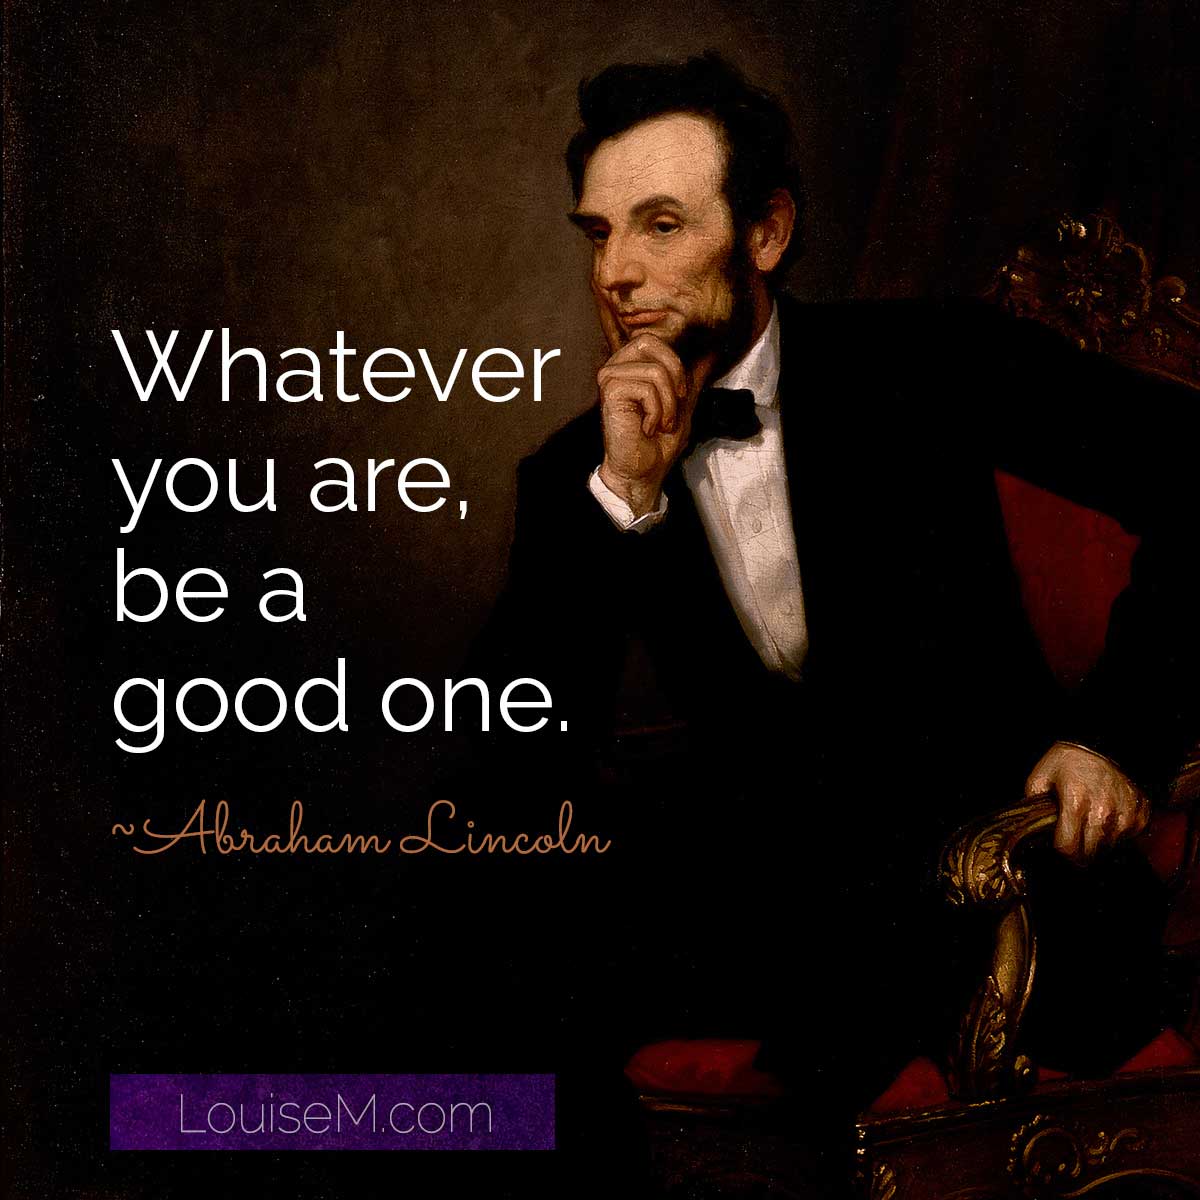 abraham lincoln quote on photo for his birthday February 12.